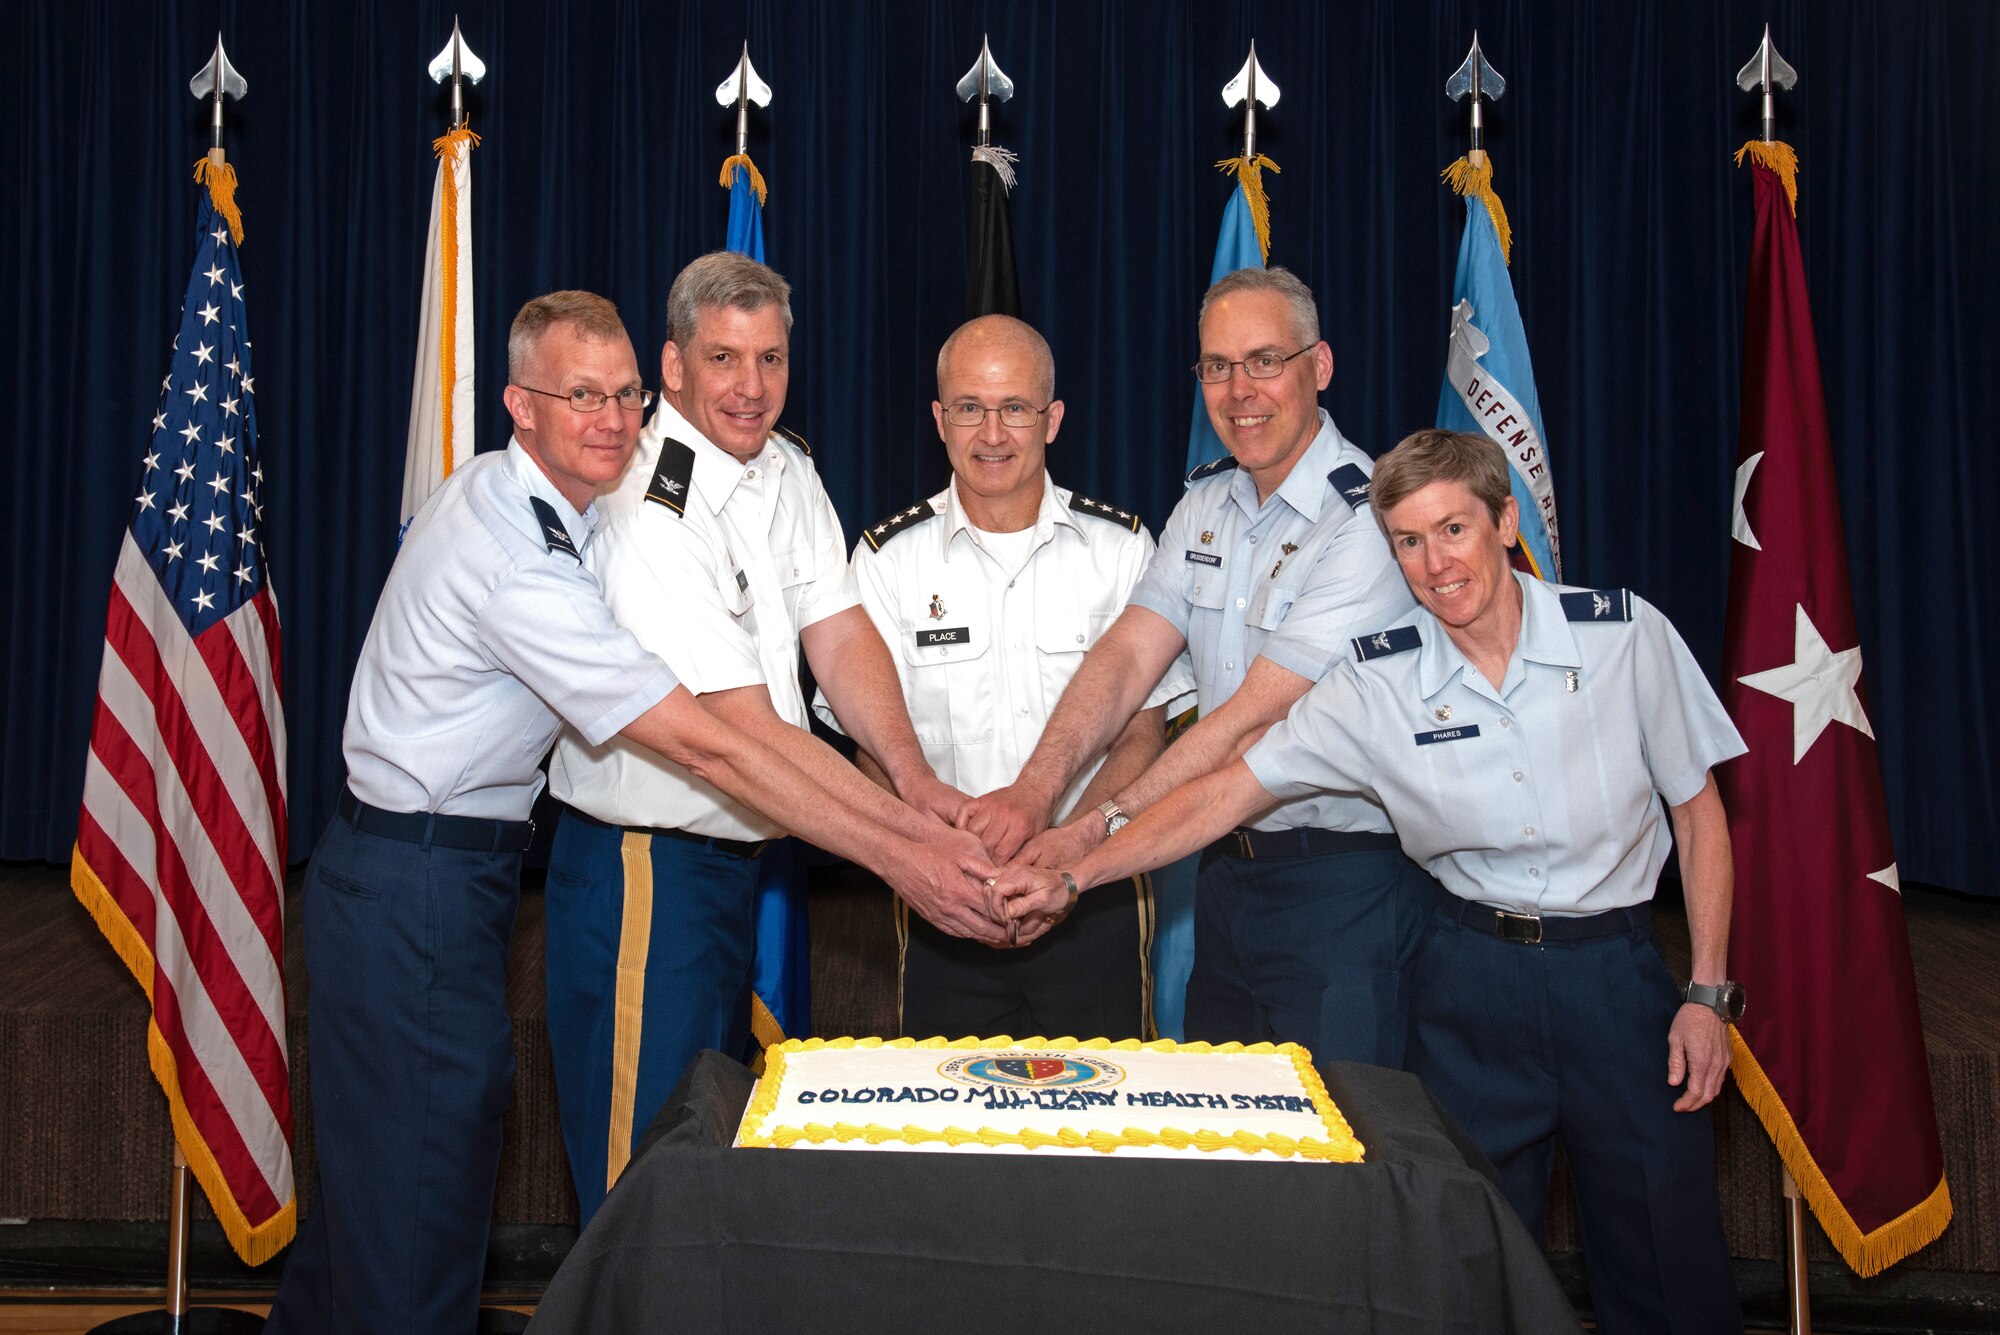 The Colorado Market establishment ceremony at Peterson Air Force Base, Colorado, on June 22, 2021, included a cake cutting with U.S. Air Force Col. Patrick Pohle, 21st Medical Group commander, left, U.S. Army Col. Kevin R. Bass, Evans Army Community Hospital commander and Colorado Market director; U.S. Army. Lt. Gen. (Dr.) Ronald J. Place, director of the Defense Health Agency; U.S. Air Force Col. Christopher Grussendorf, 10th Medical Group commander; and U.S. Air Force Col. Shannon Phares, 460th Medical Group commander.